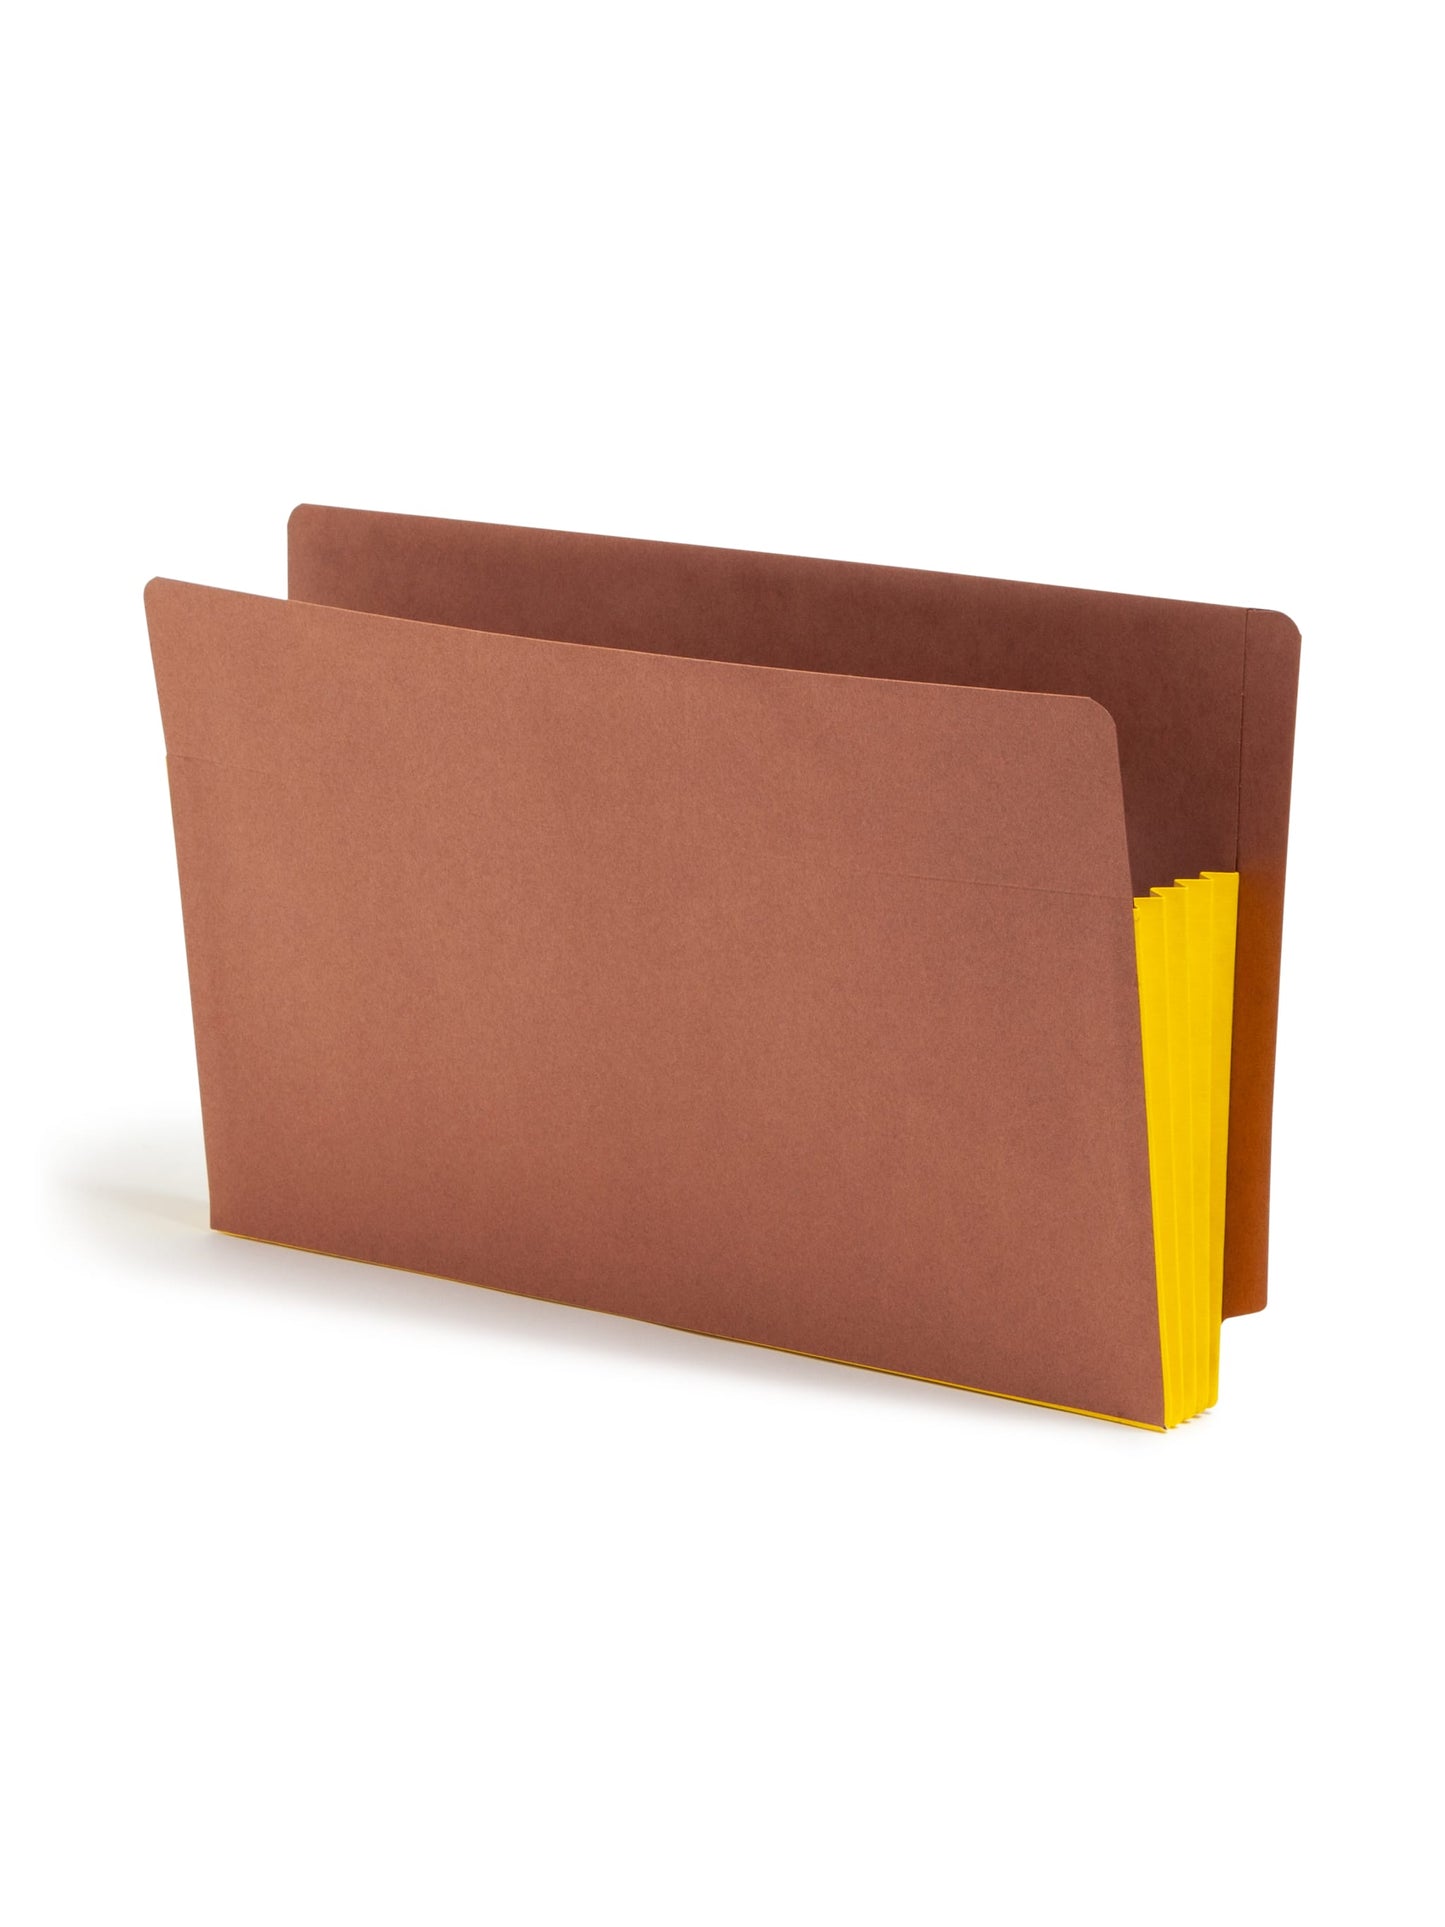 Reinforced End Tab File Pockets, Straight-Cut Tab, 3-1/2 inch Expansion, Yellow Color, Extra Wide Legal Size, Set of 0, 30086486746886